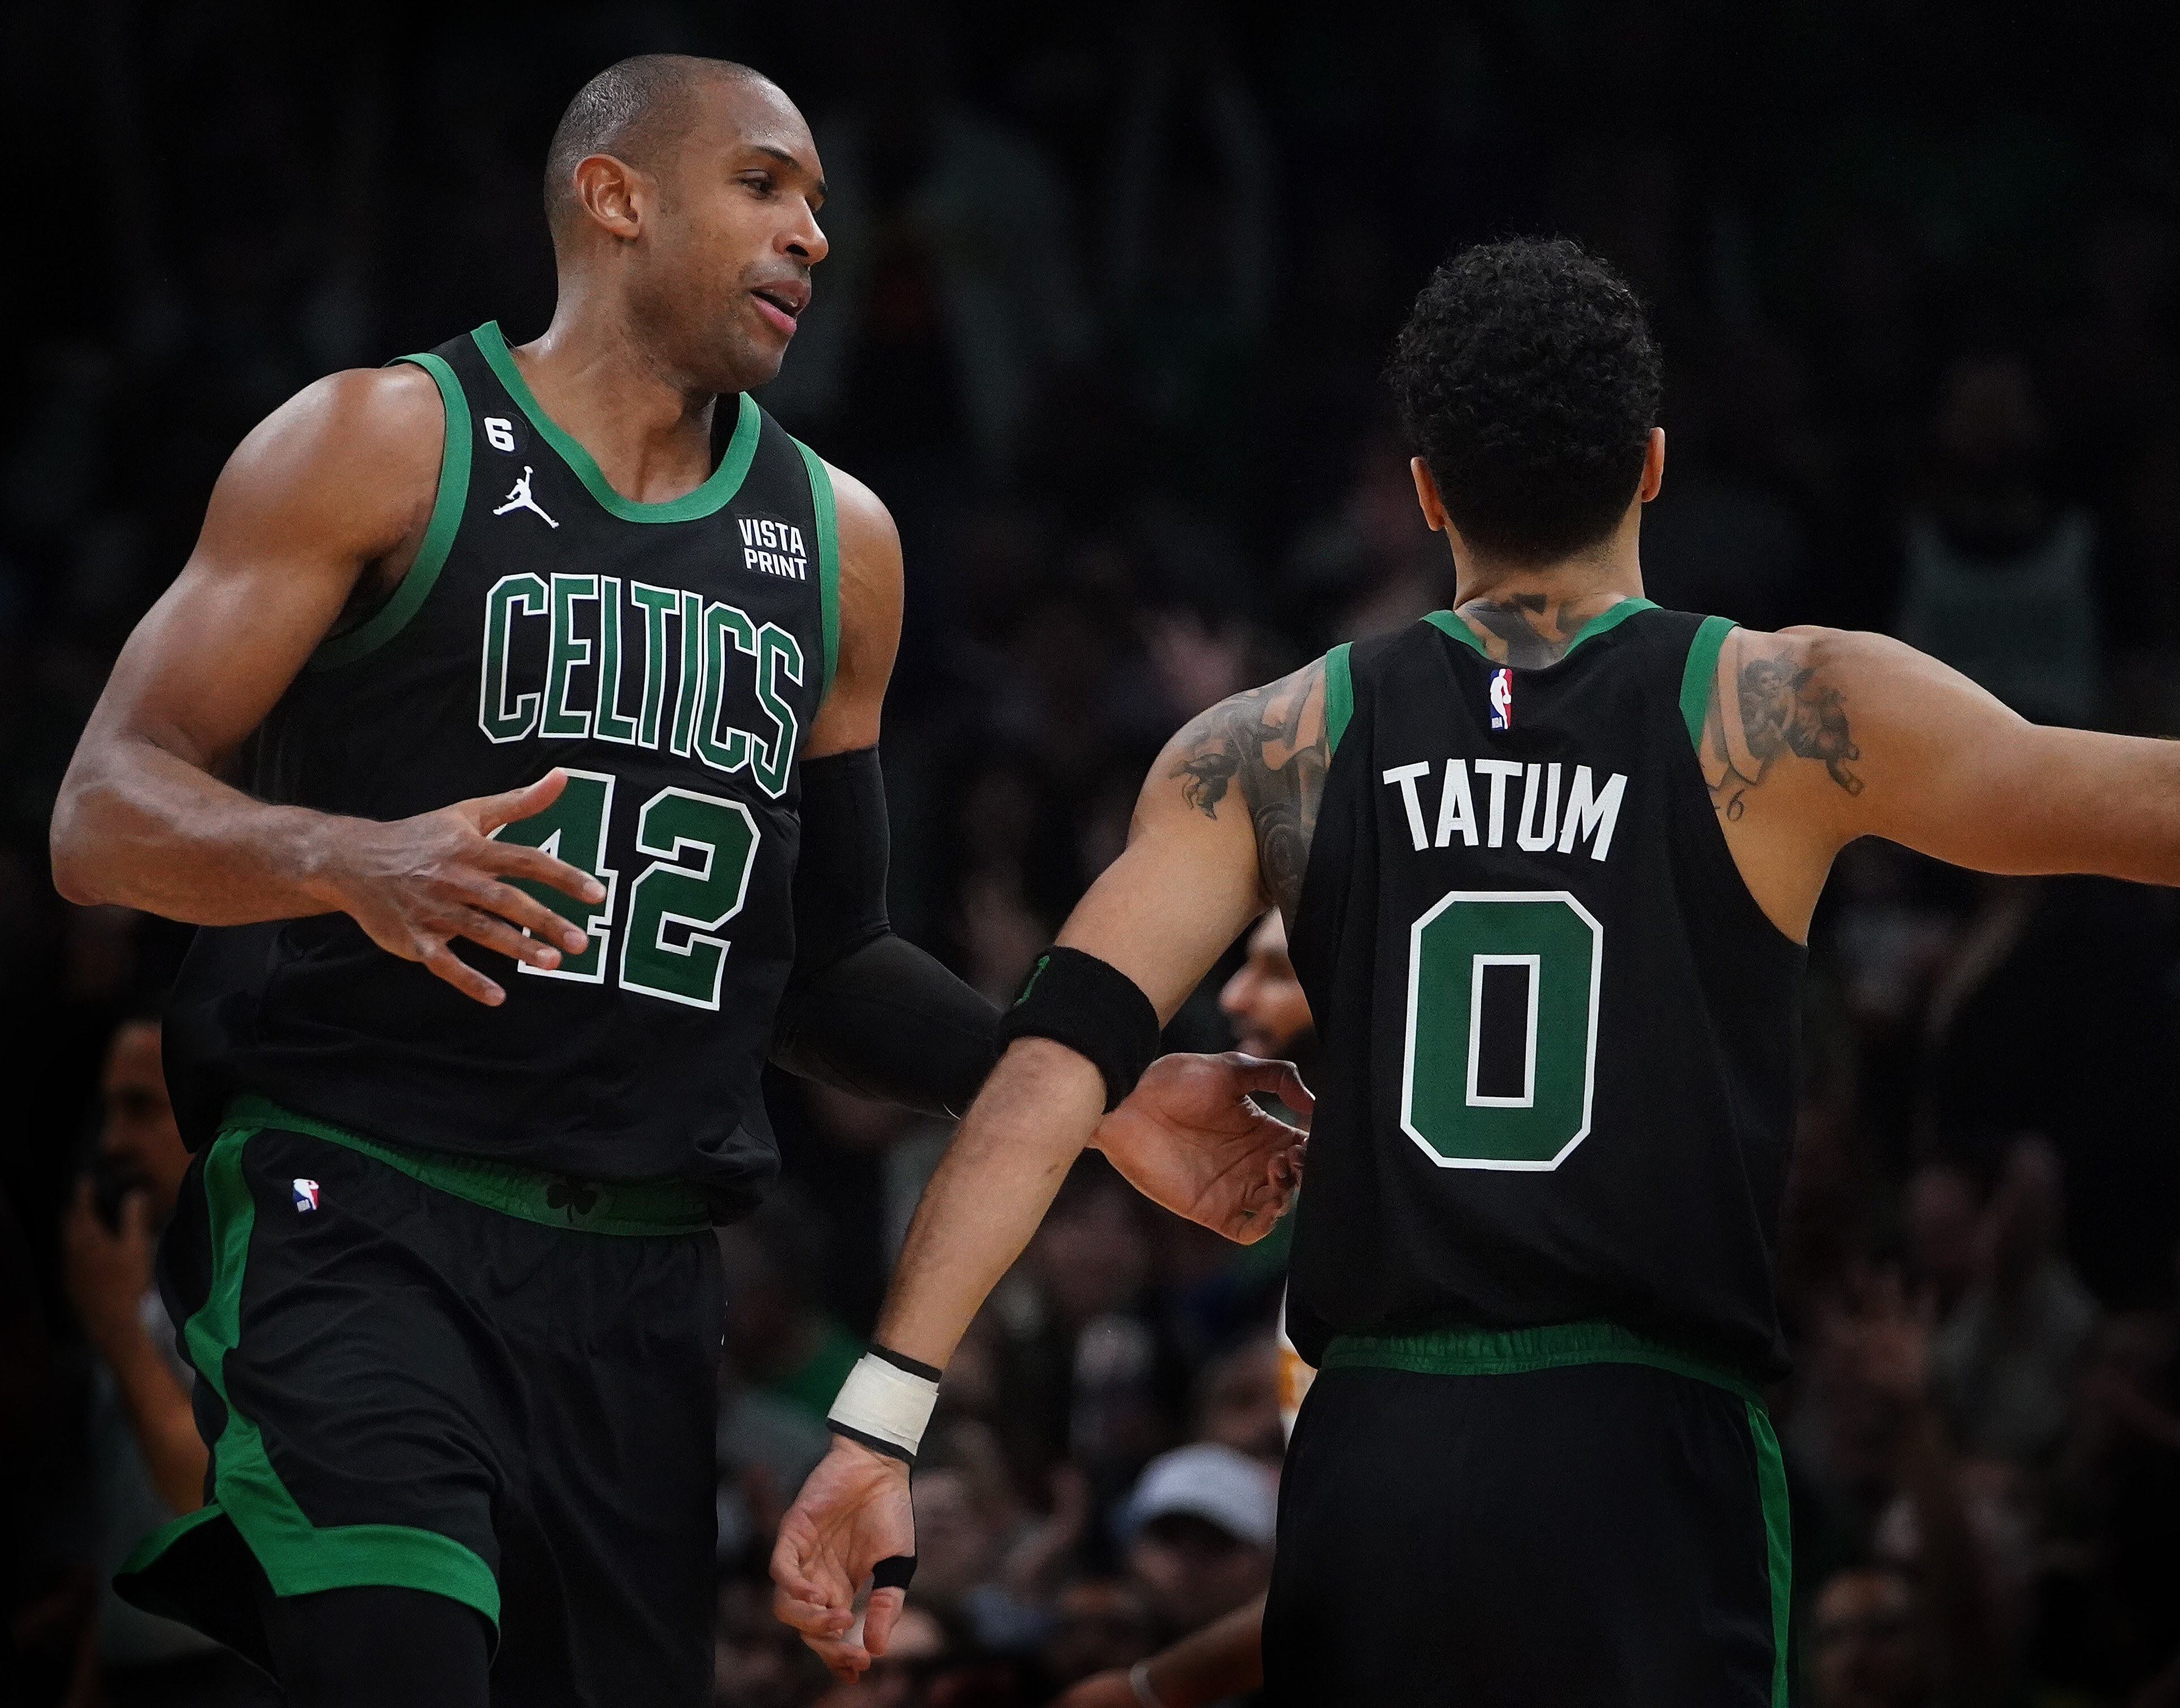 The Celtics got all gussied up to kick off their upcoming season